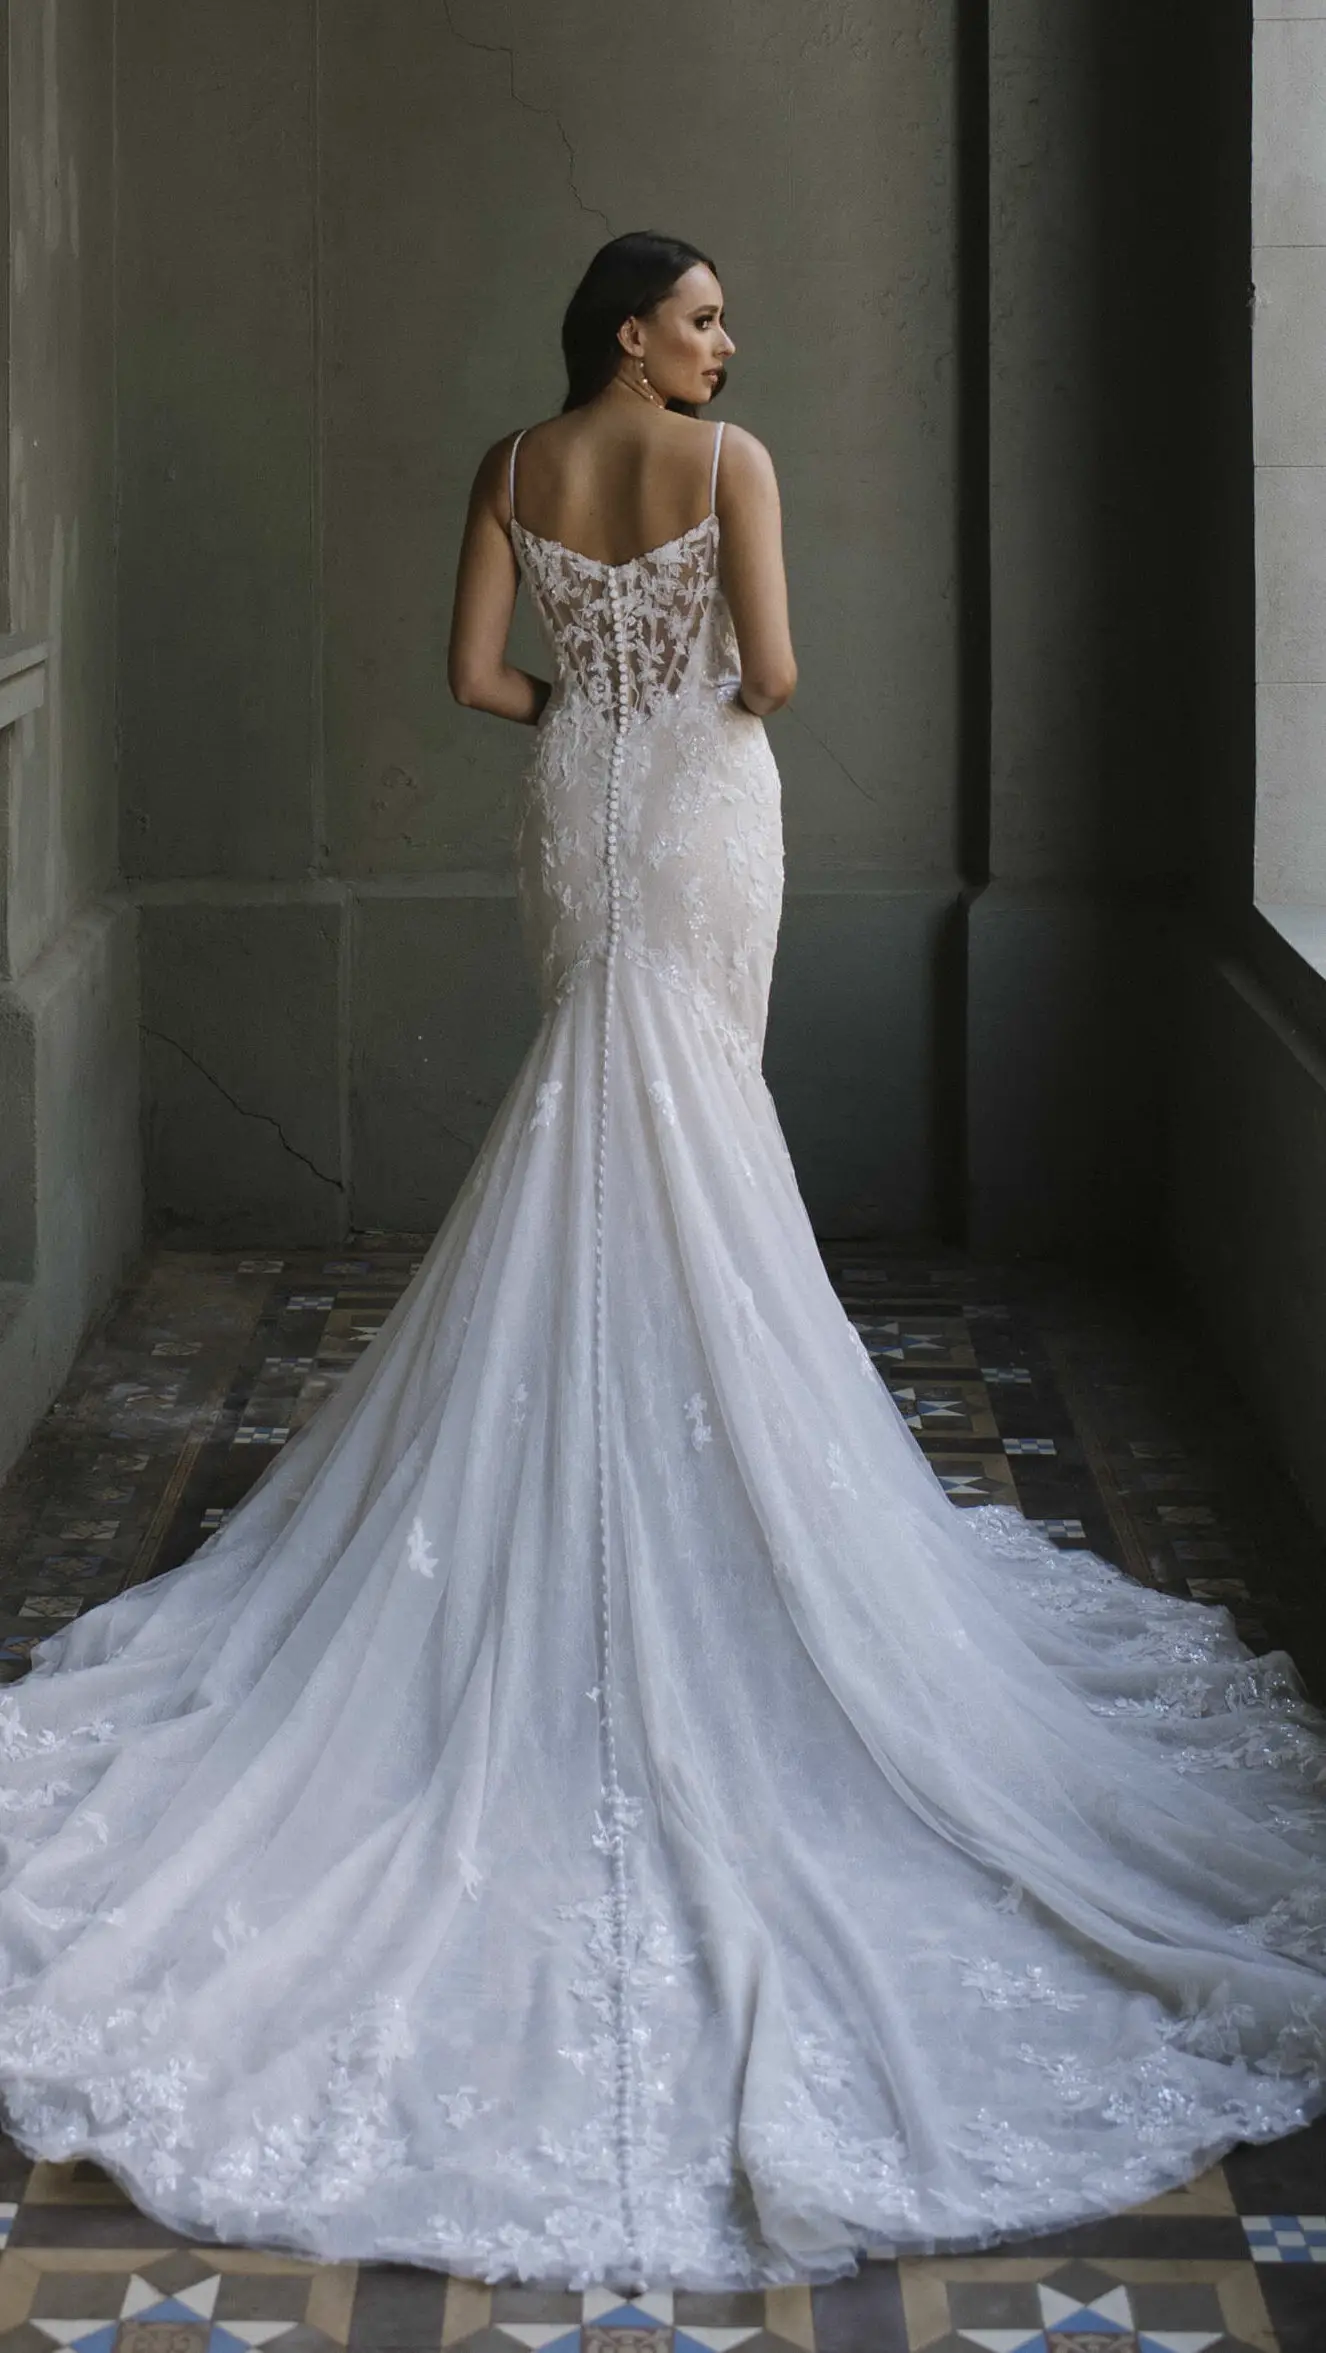 Lace Bridal Gown by Martina Liana - Style: 1389